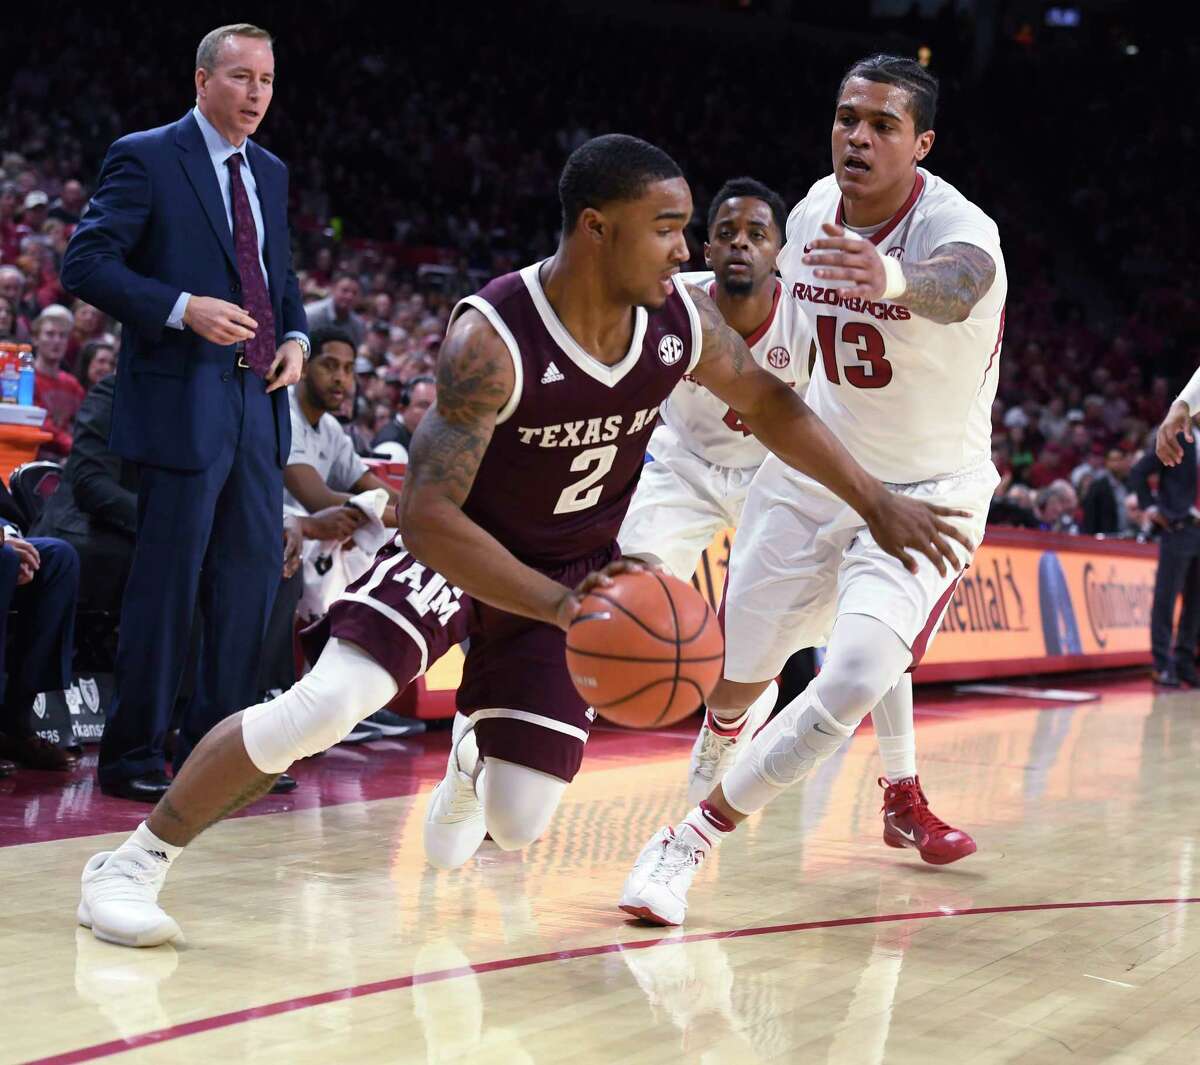 Texas A&M guard TJ Starks tries to get past Arkansas defender Dustin Thomas during the first half of an NCAA college basketball game Saturday, Feb. 17, 2018, in Fayetteville, Ark. (AP Photo/Michael Woods)